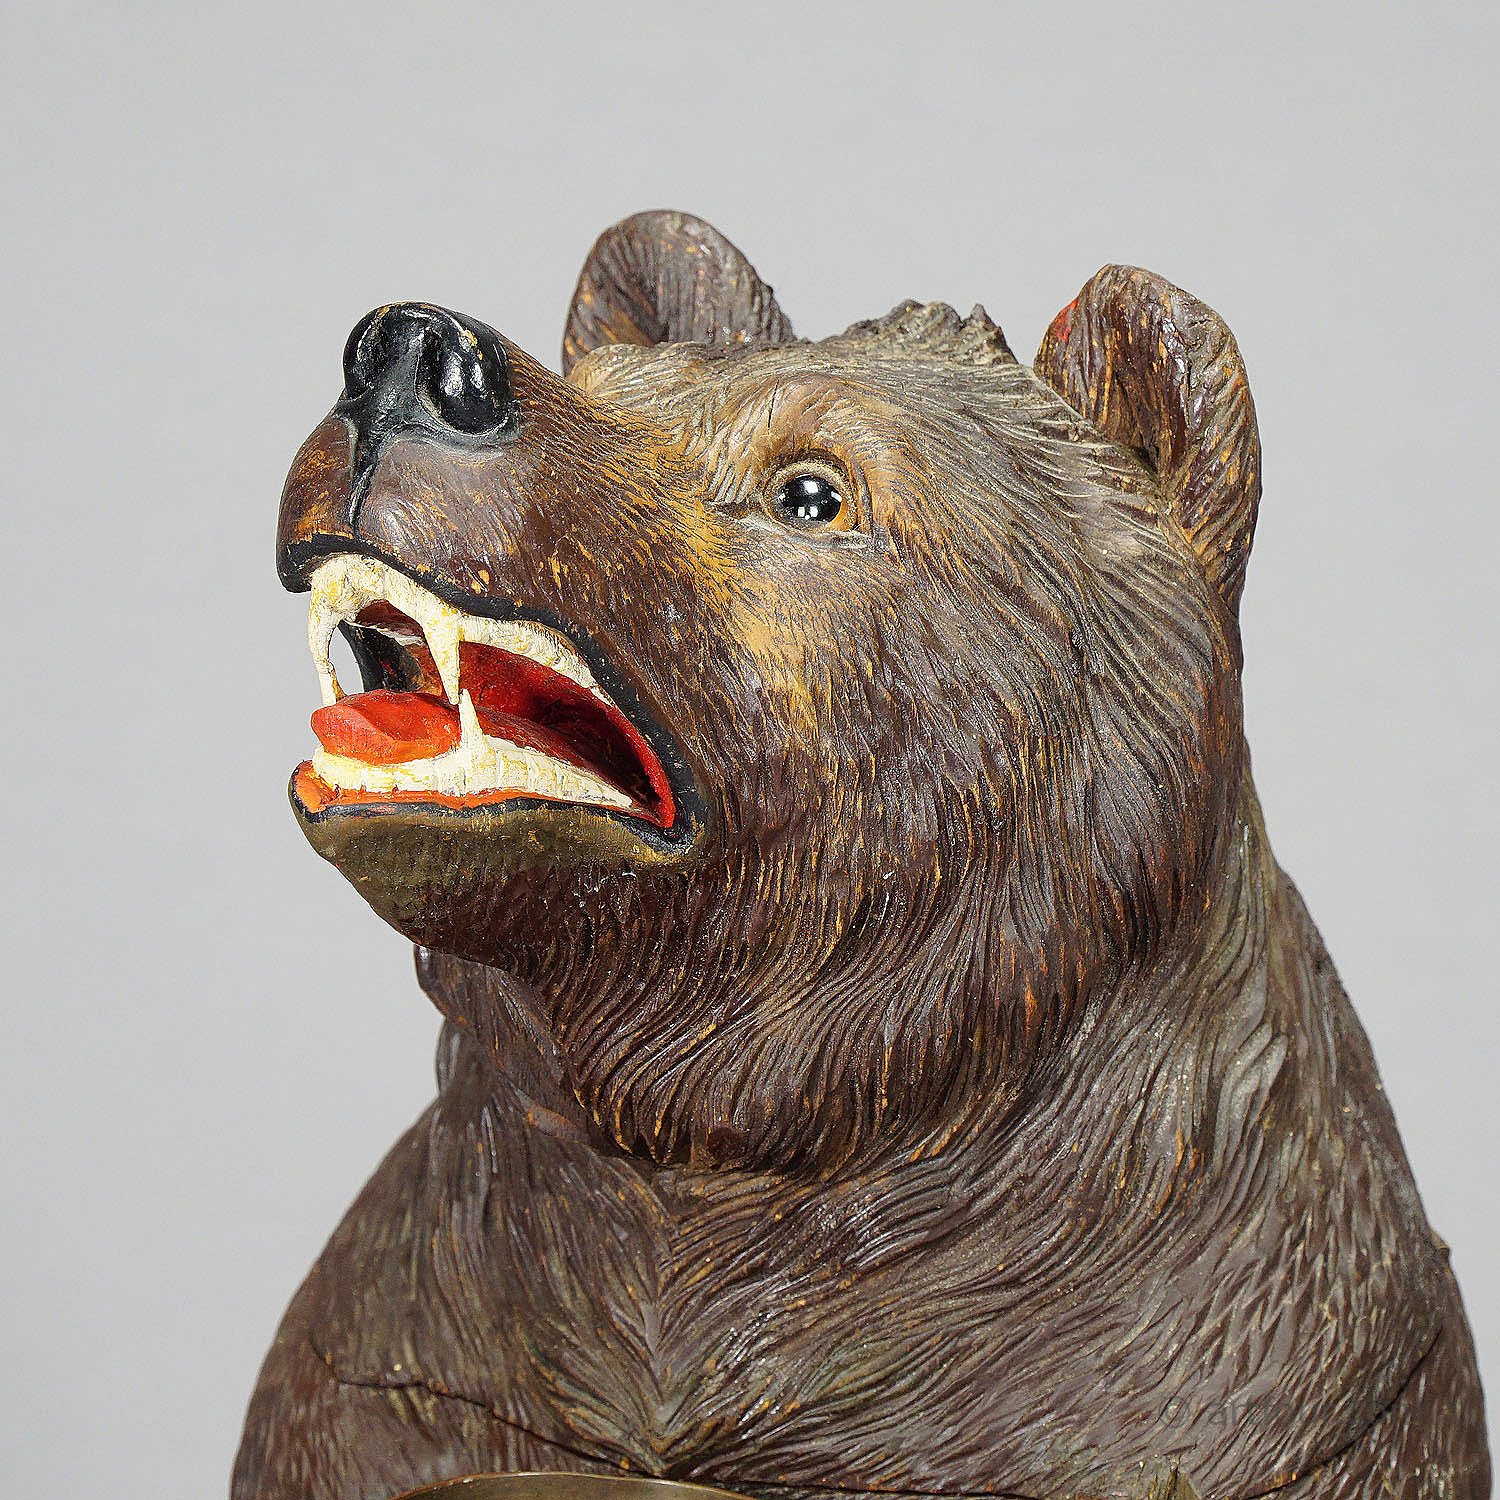 Large Wooden Carved Bear Tobacco Box, Swizerland ca. 1900